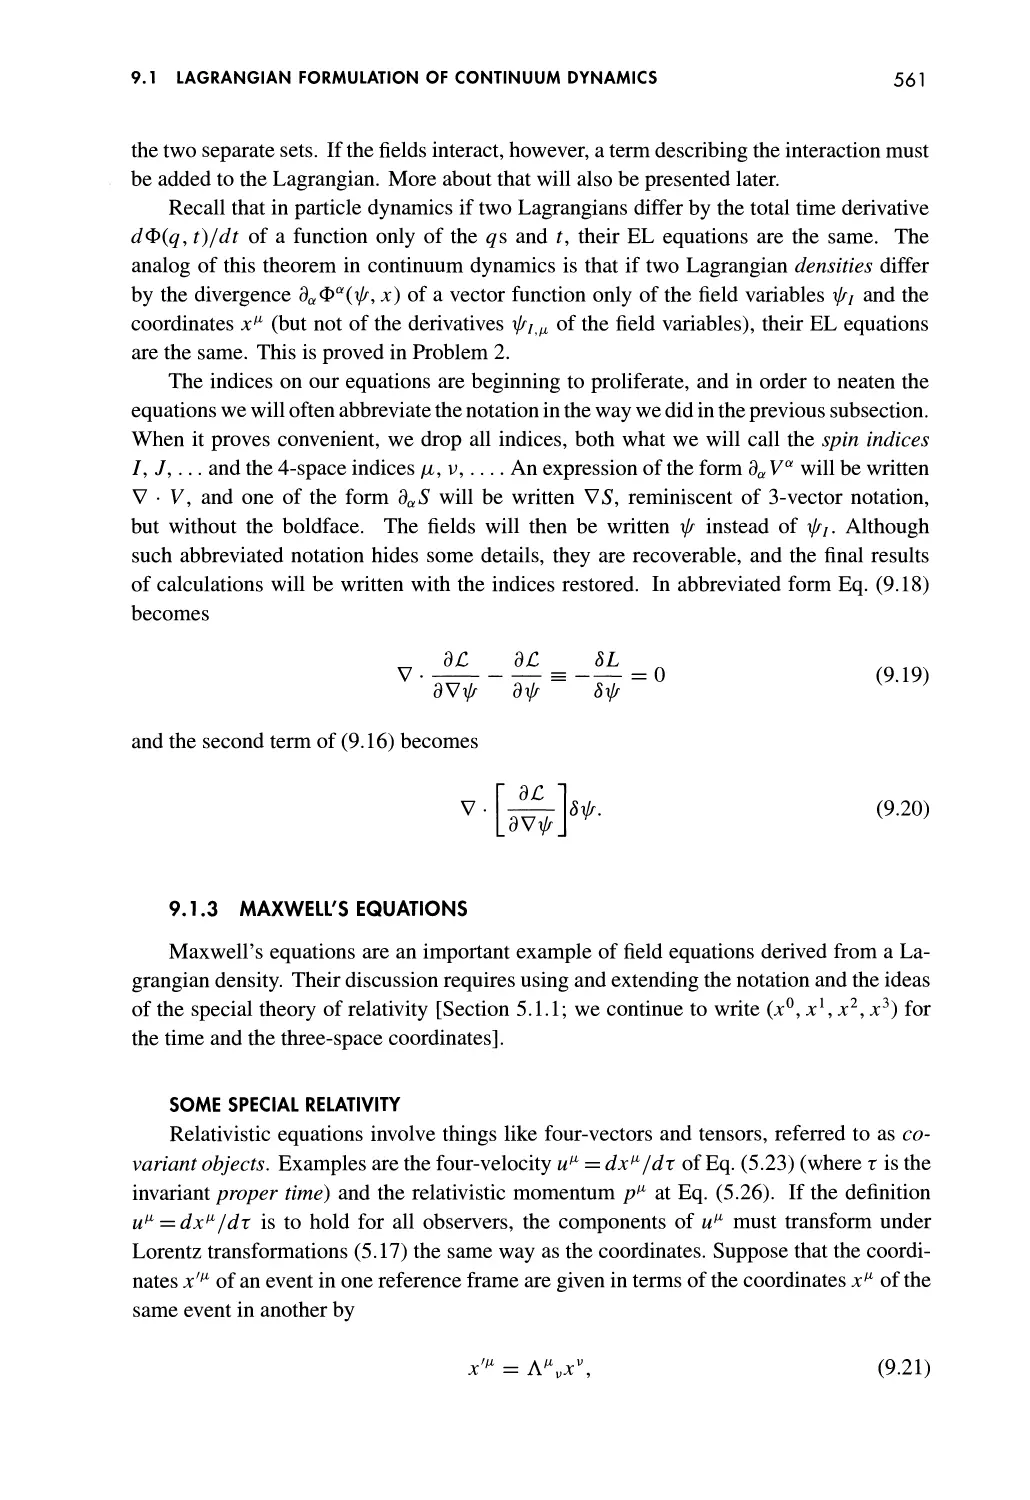 9.1.3 Maxwell's Equations